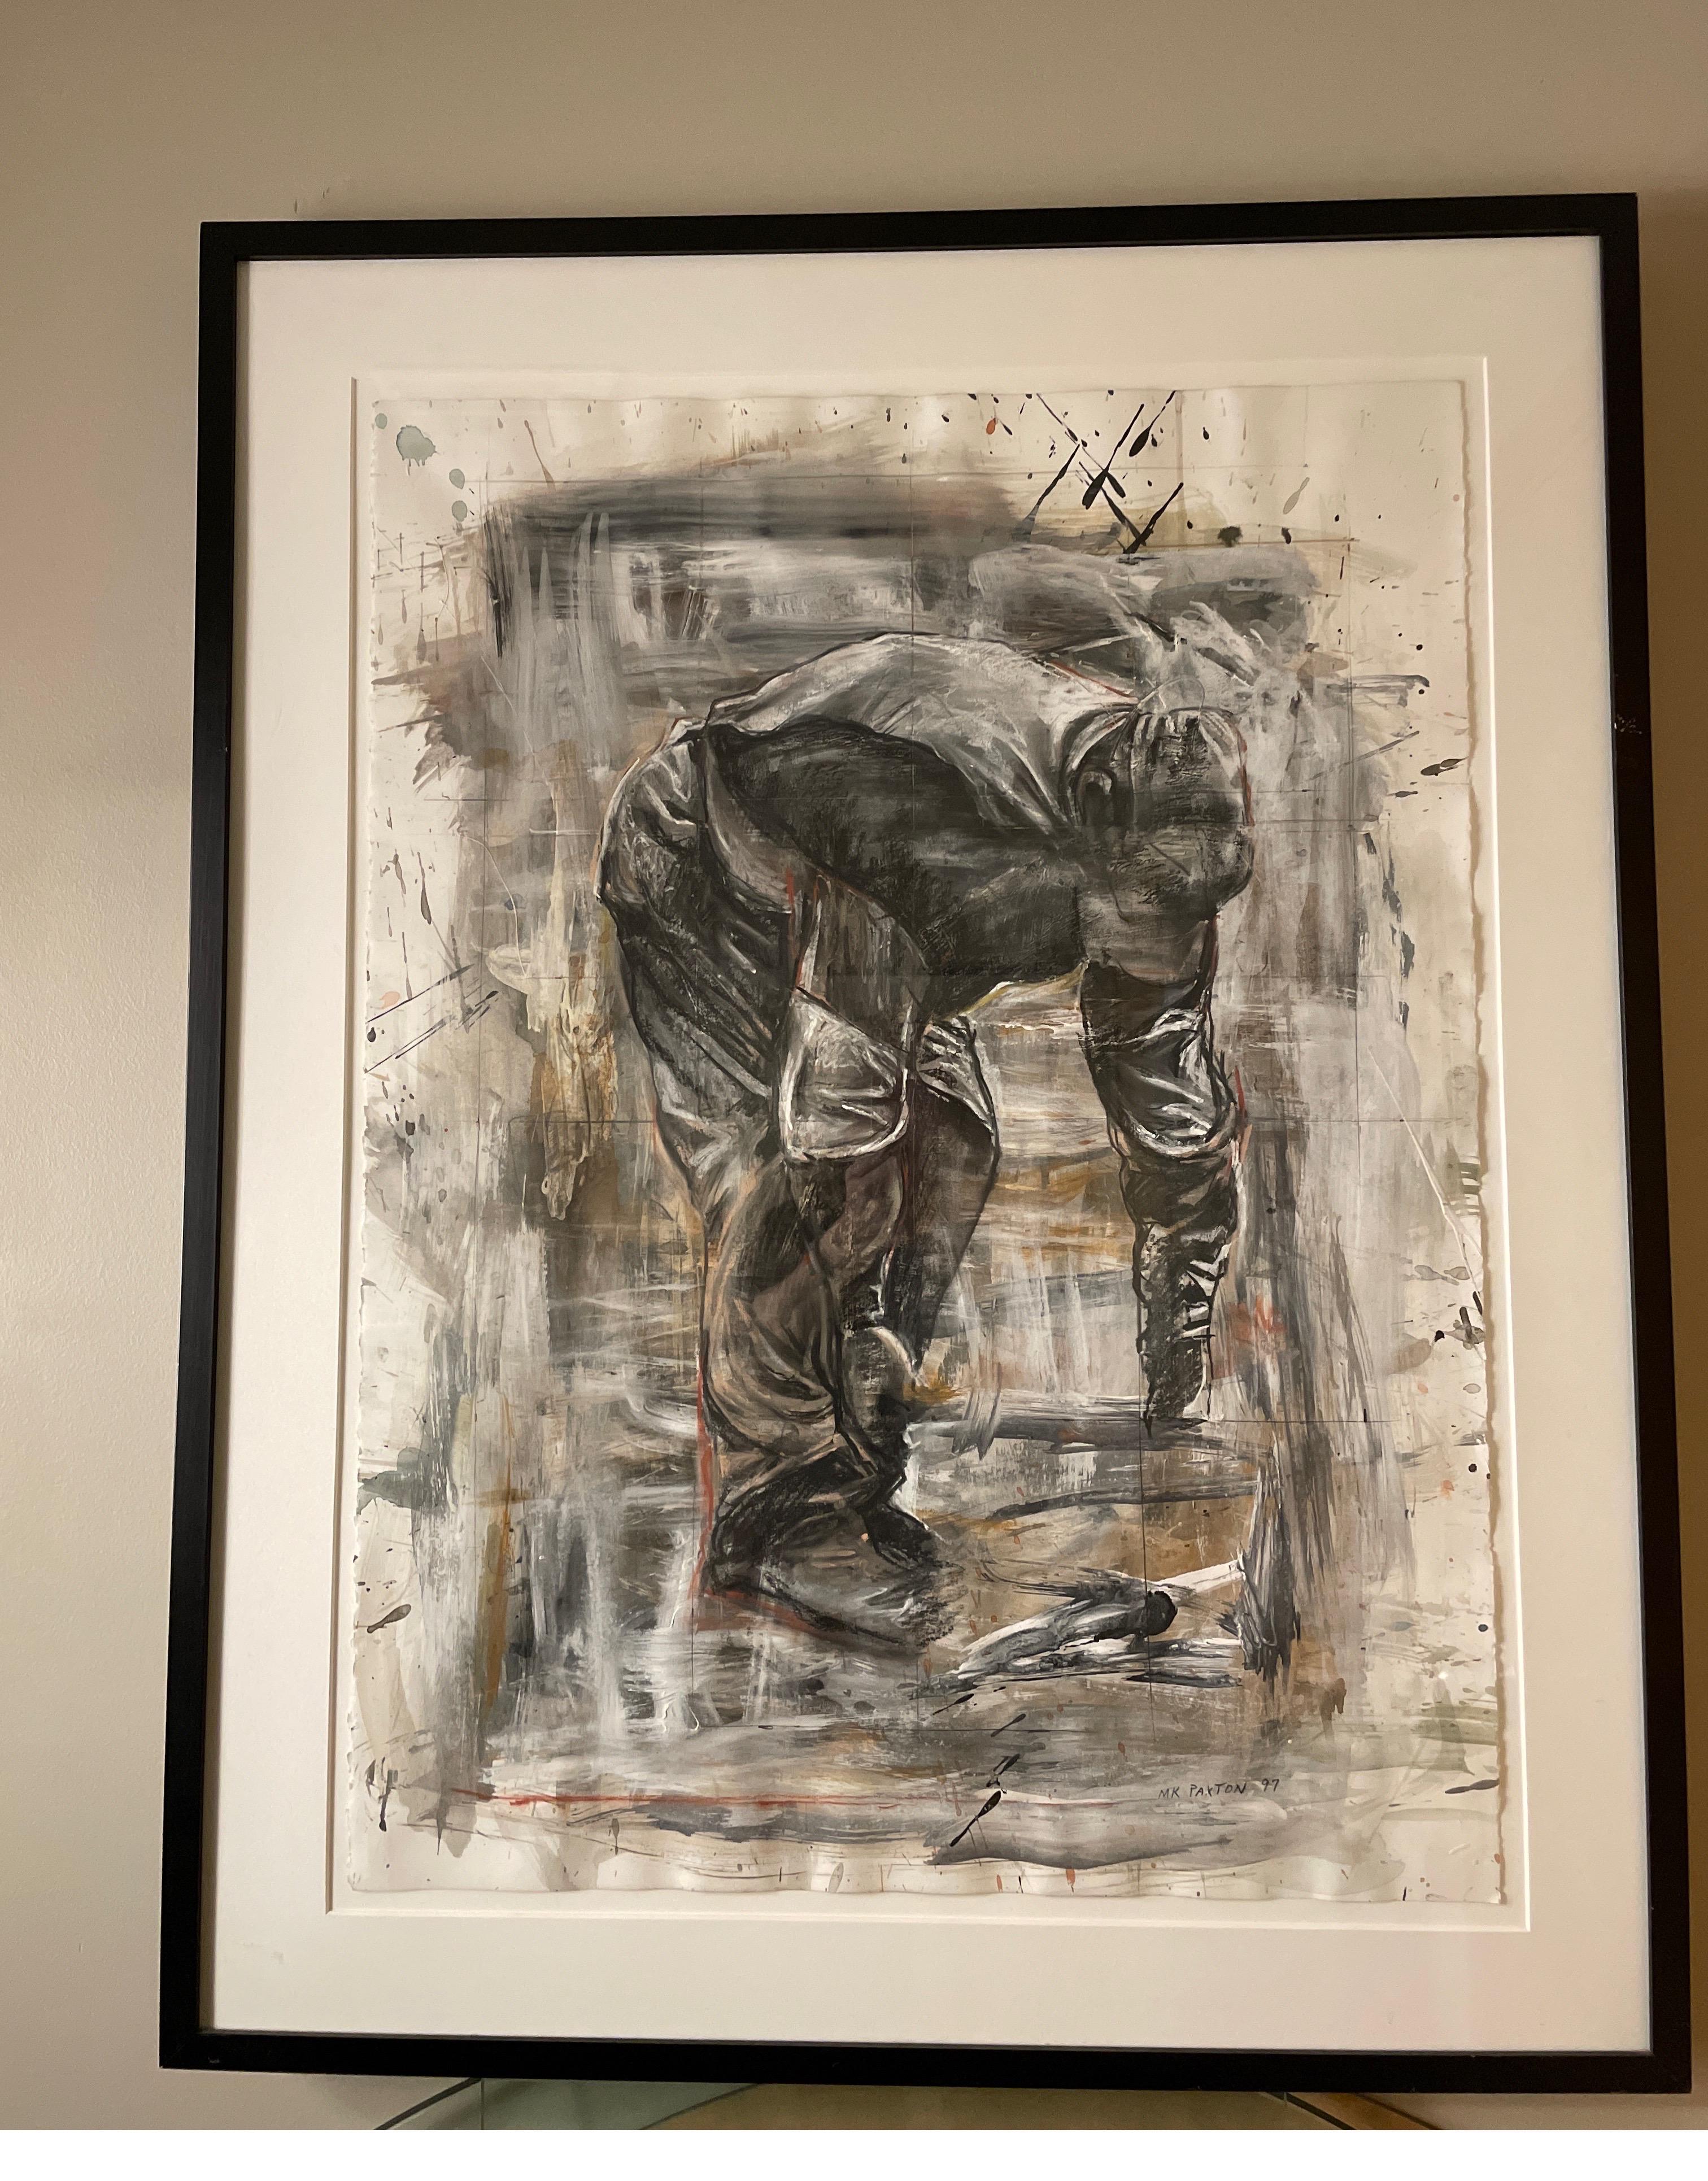 Paint “Worker”, mixed media art by Michael K Paxton For Sale